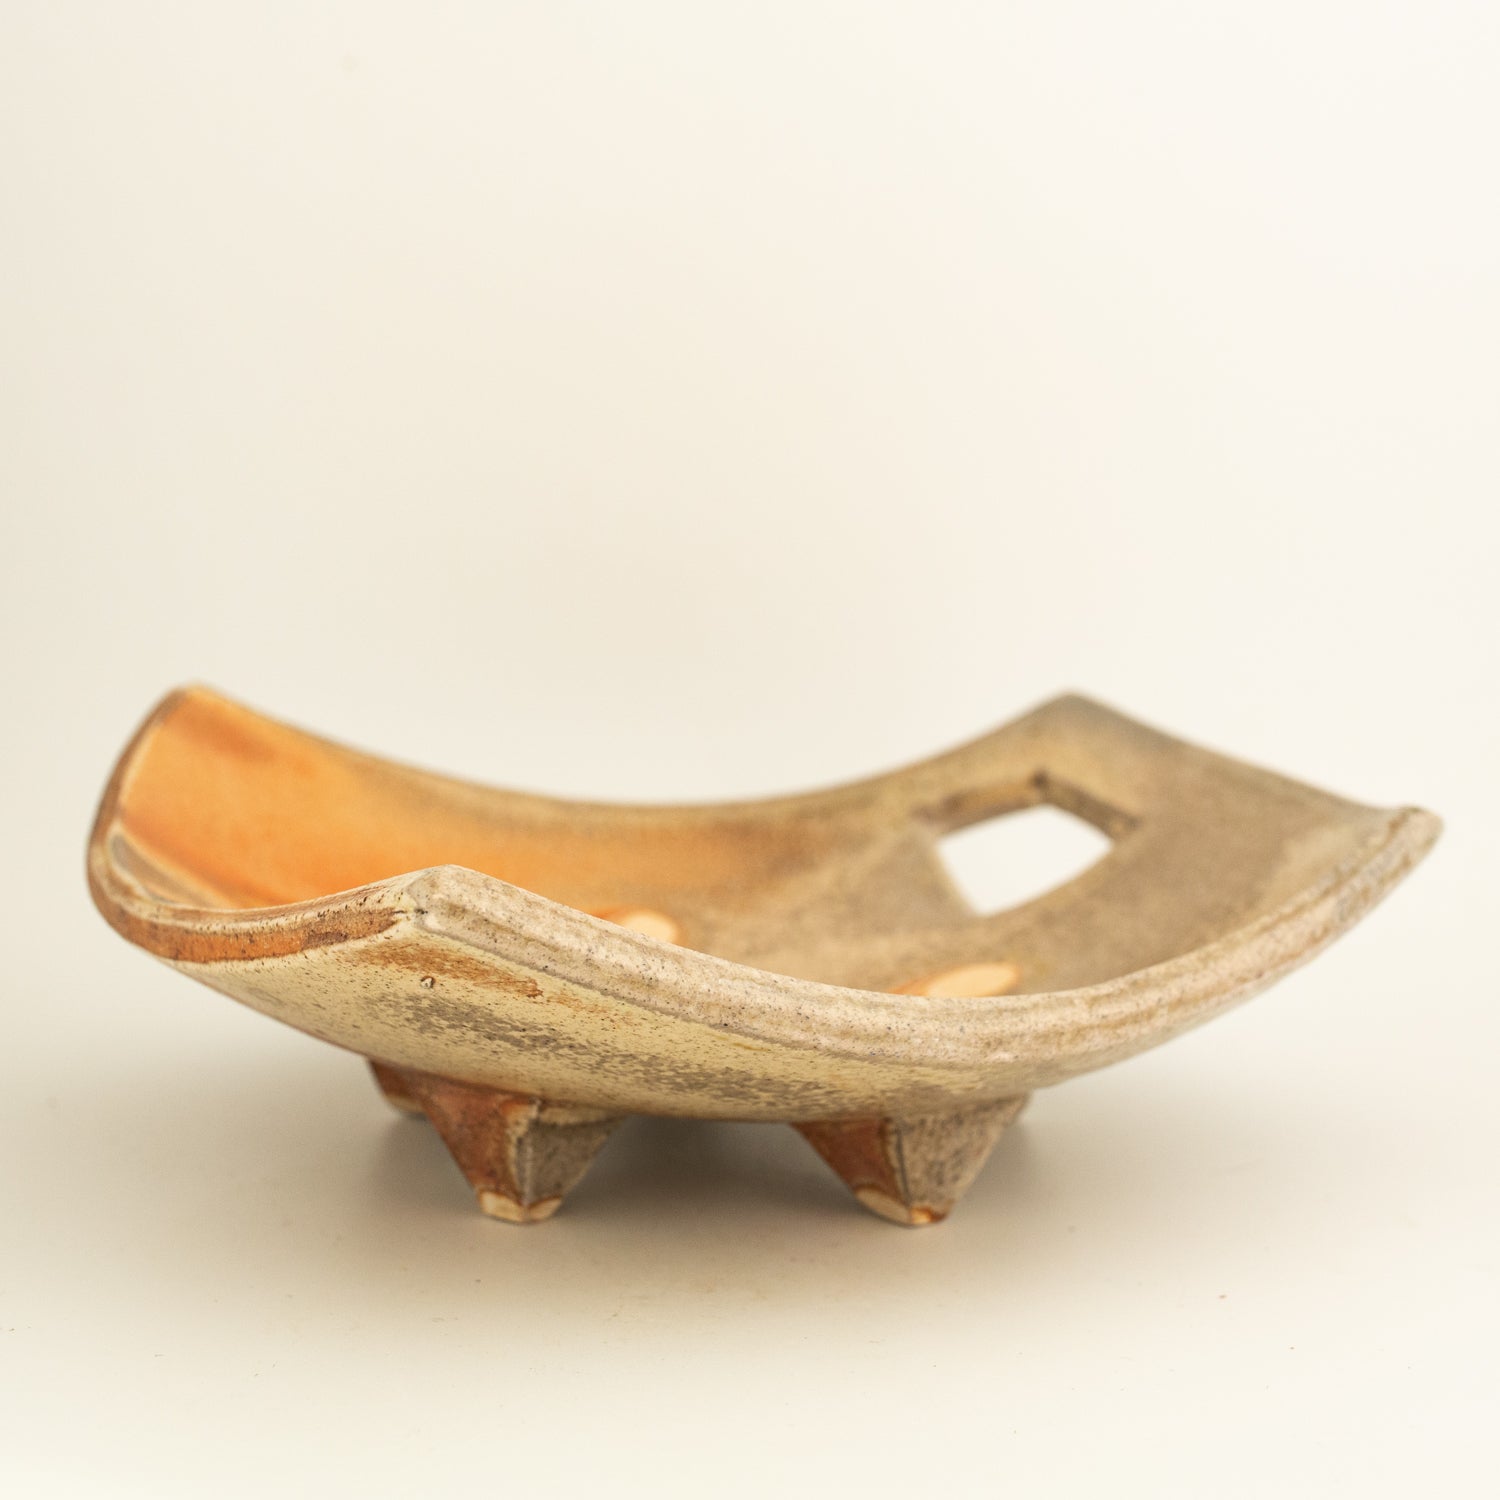 Footed Hand Plate #16